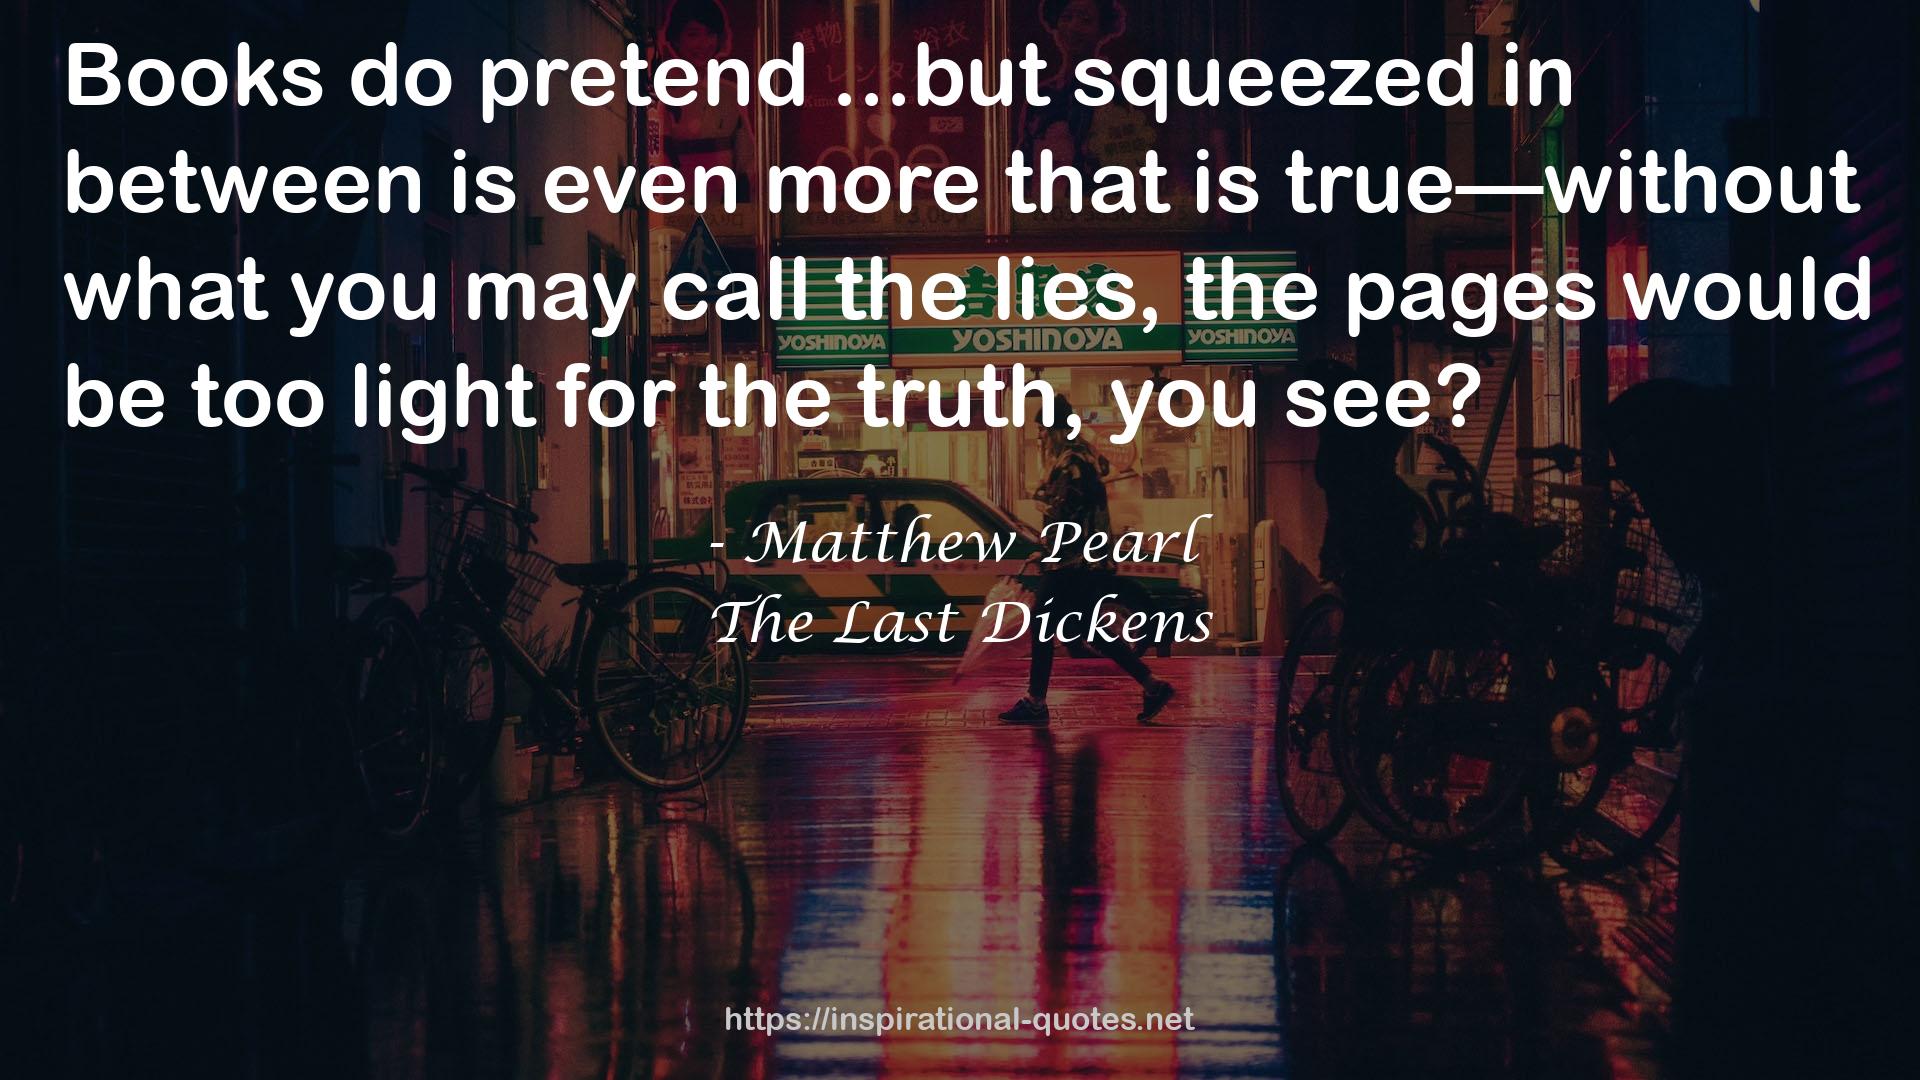 Matthew Pearl QUOTES